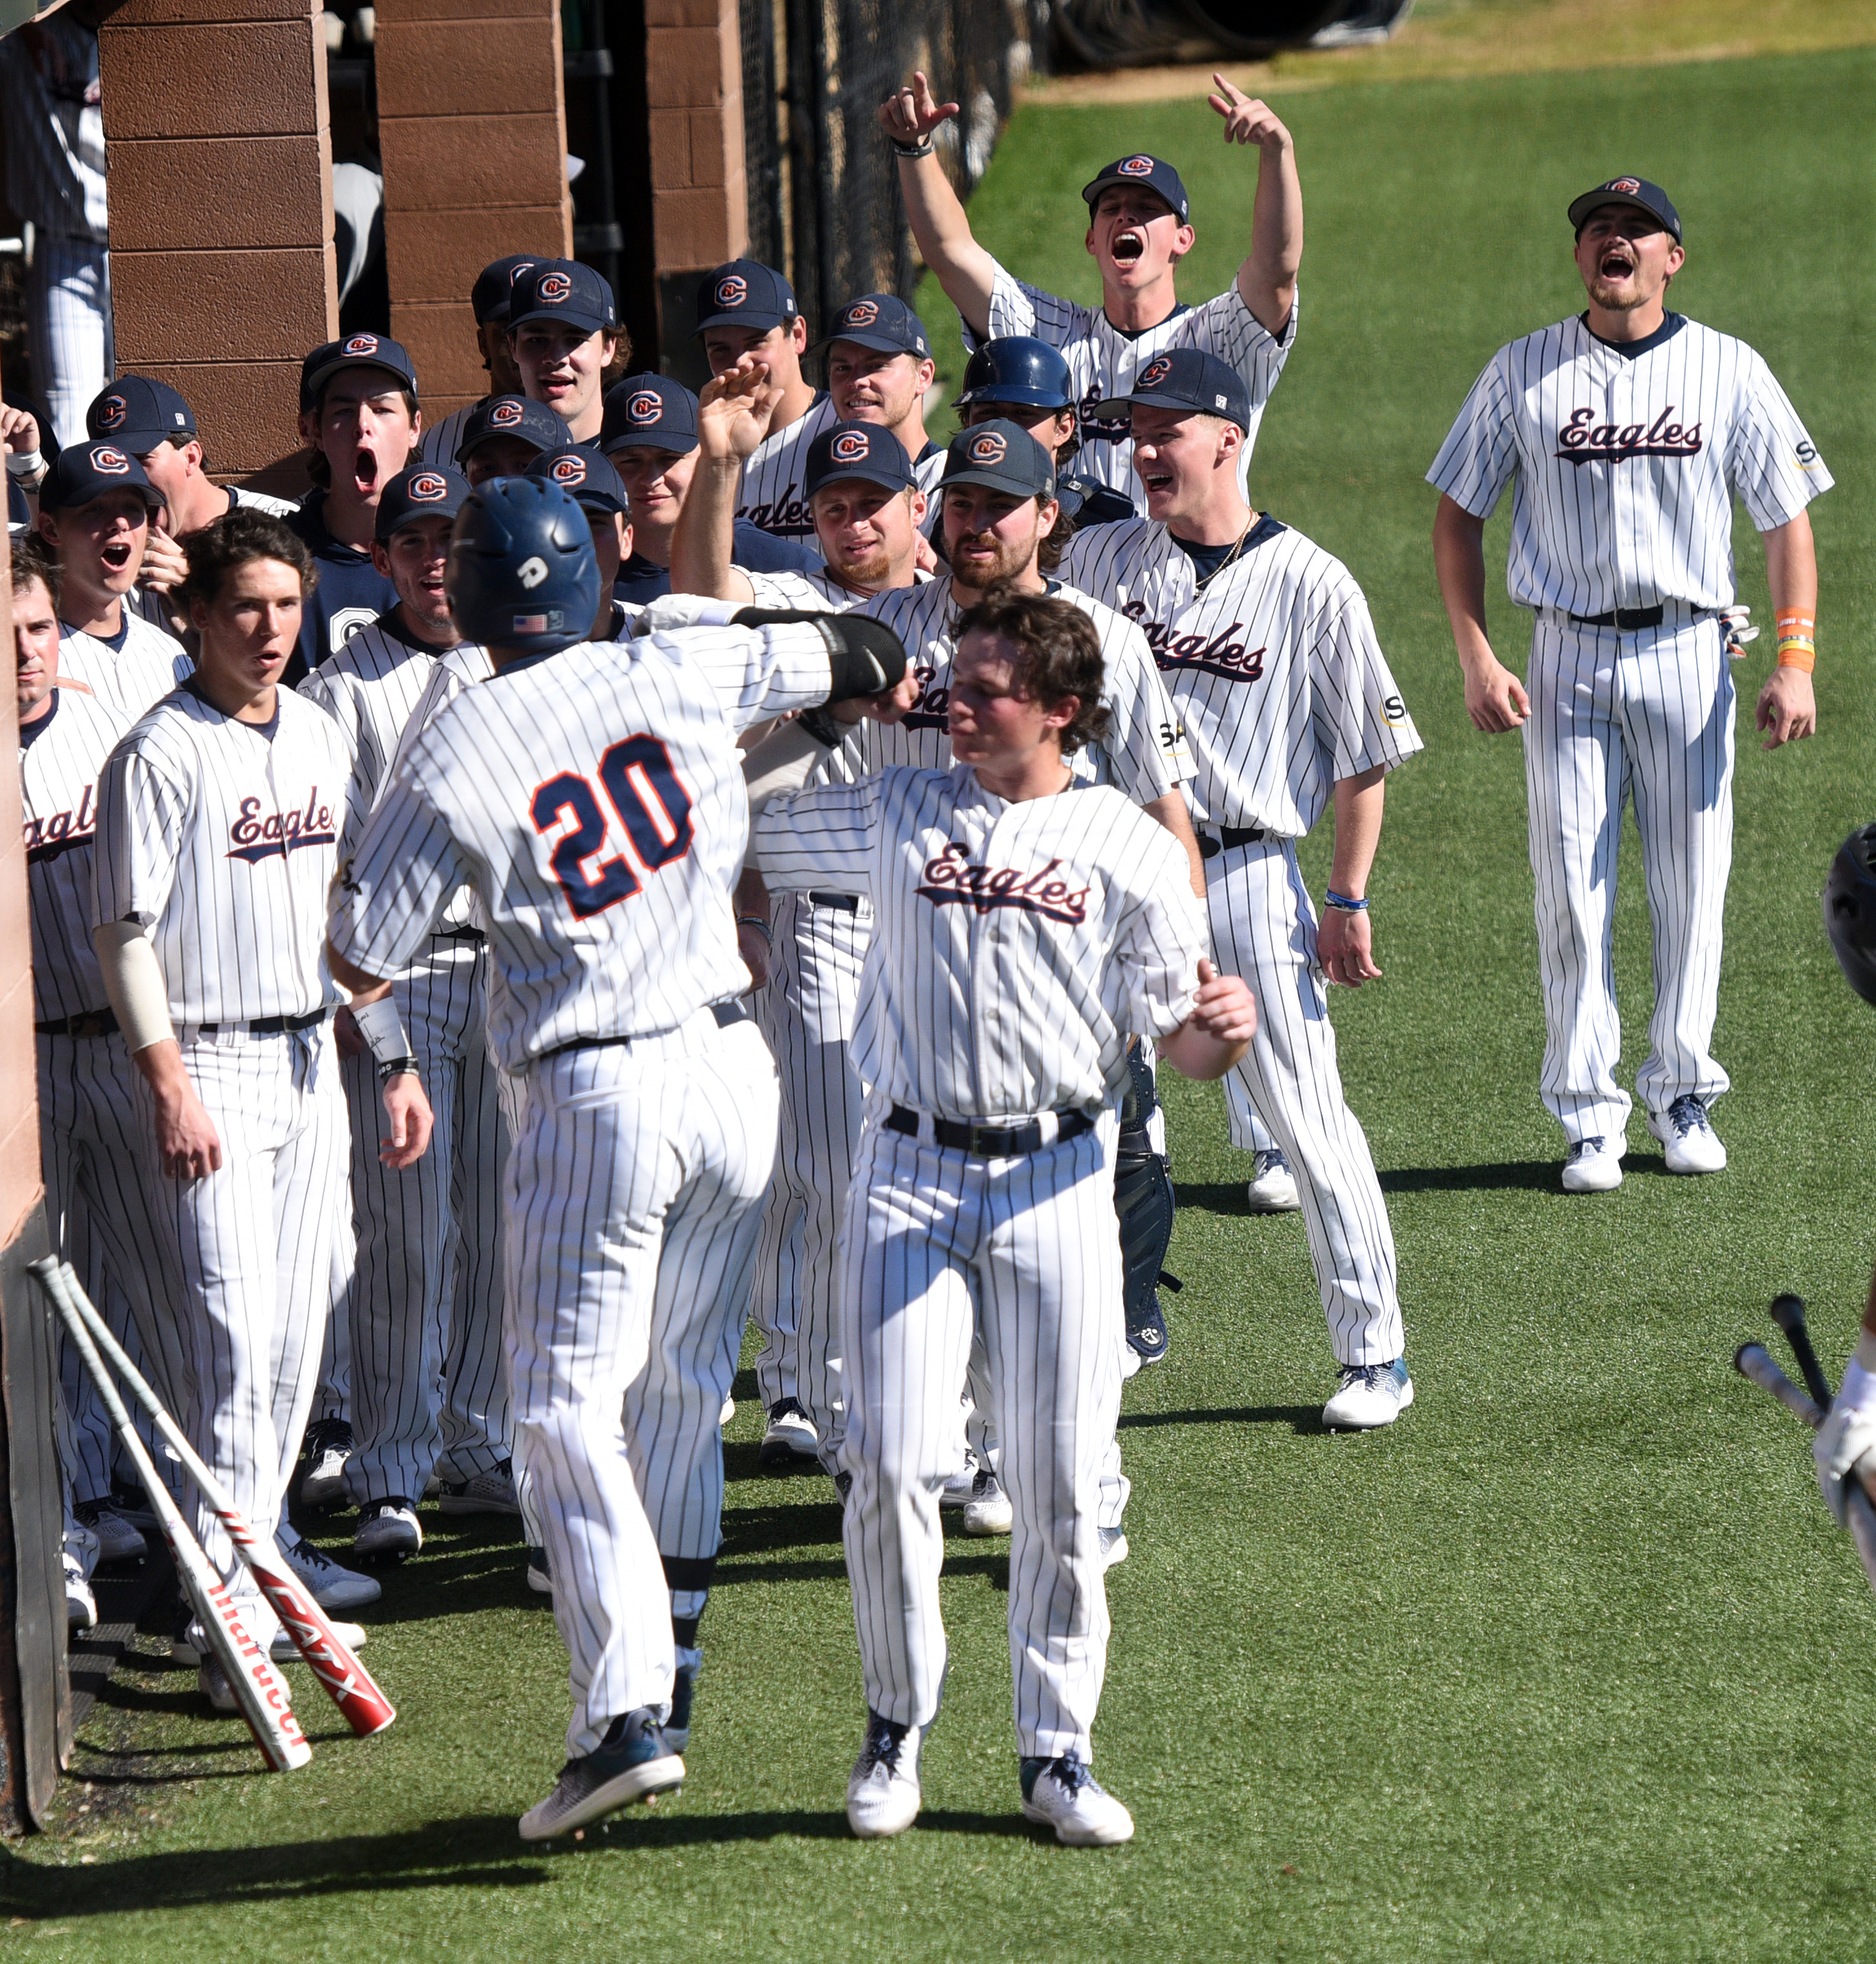 Eagles earn a pair of two-run victories to sweep opening day doubleheader against King